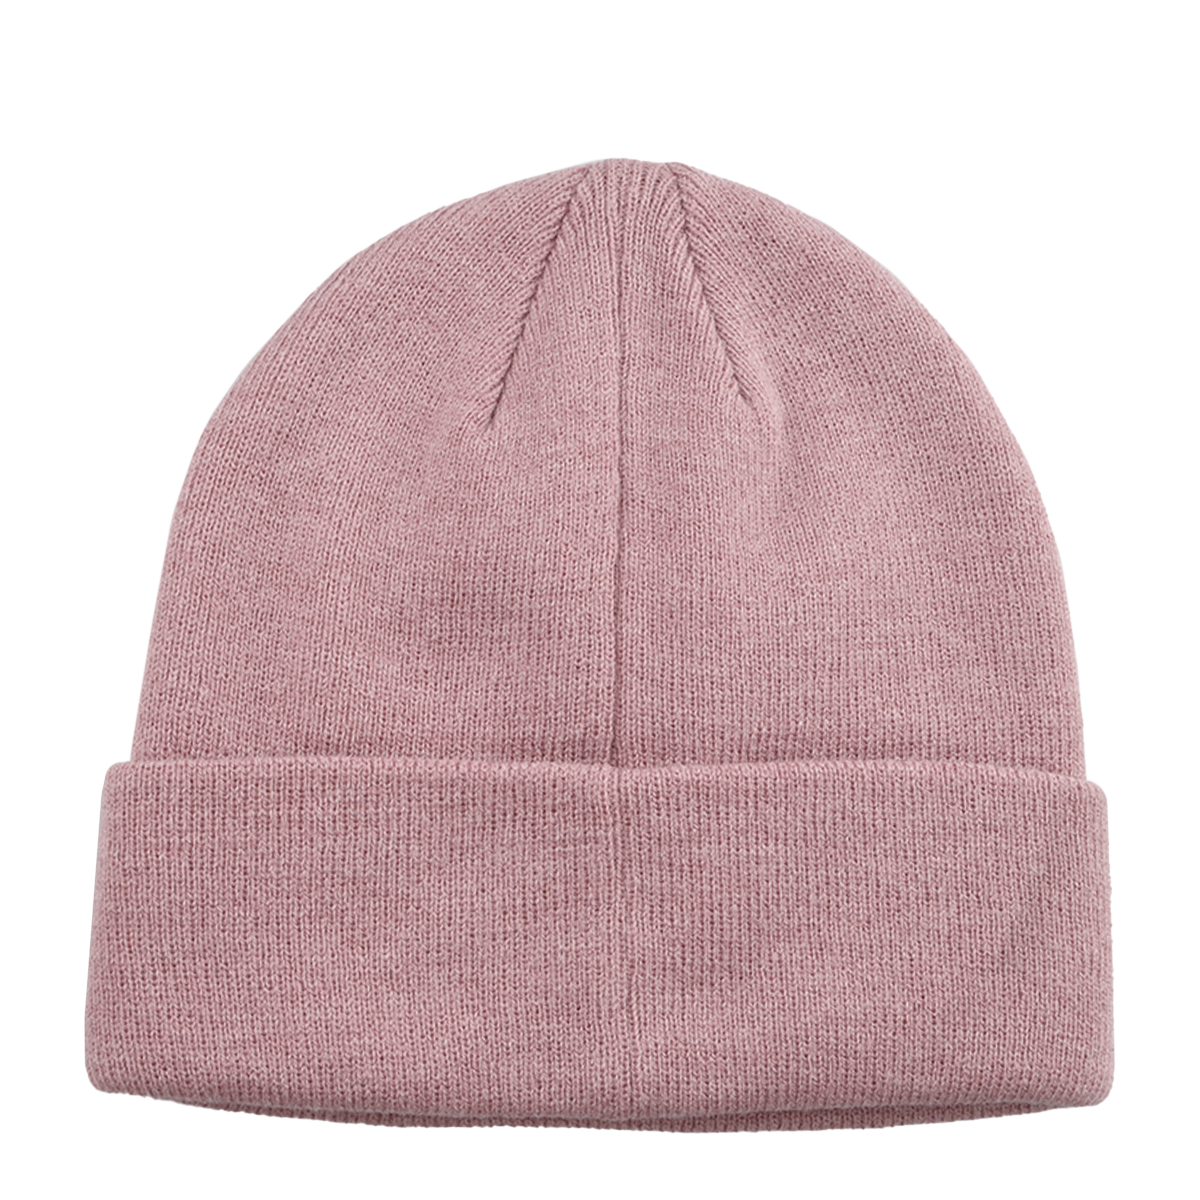 Gorro Puma Archive Heather Beanie,  image number null